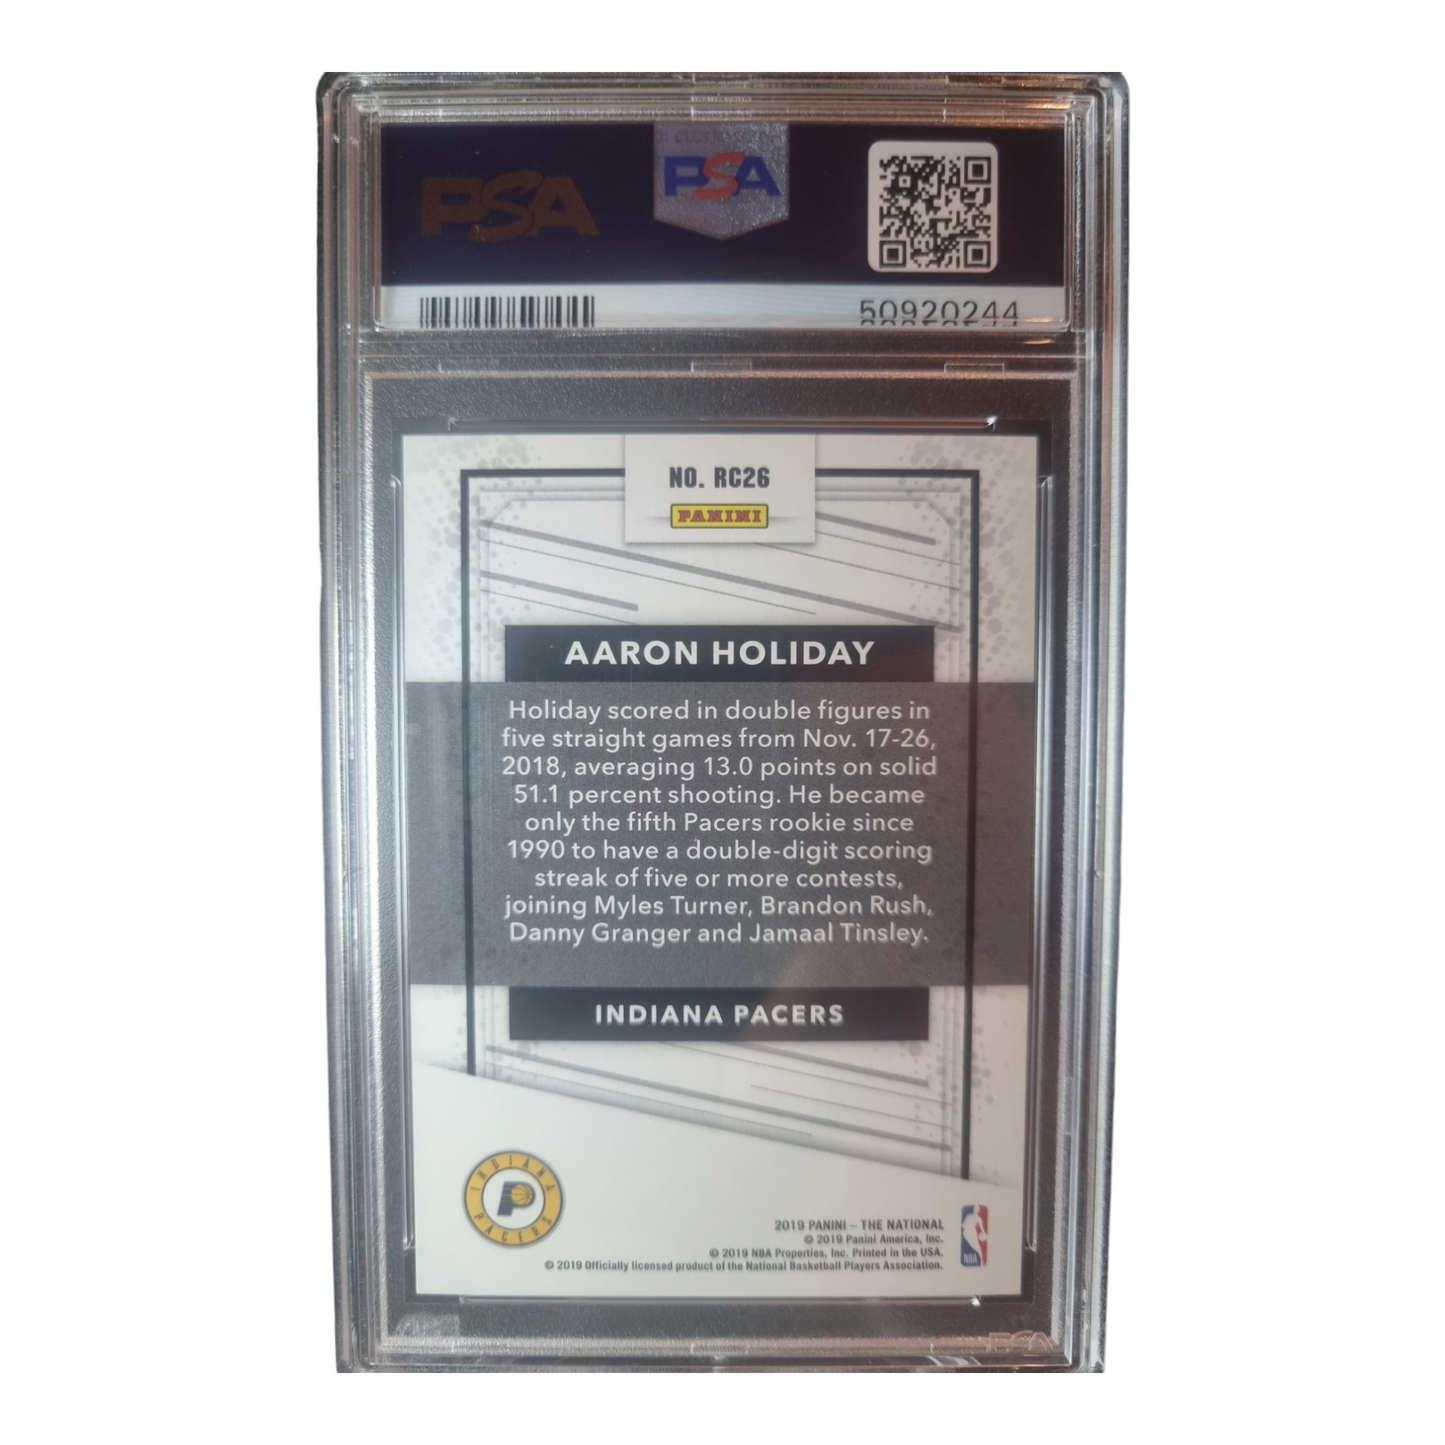 2019 Panini The National Rookies Explosion #RC26 Aaron Holiday Rookie Card 14/40 PSA 9 Mint